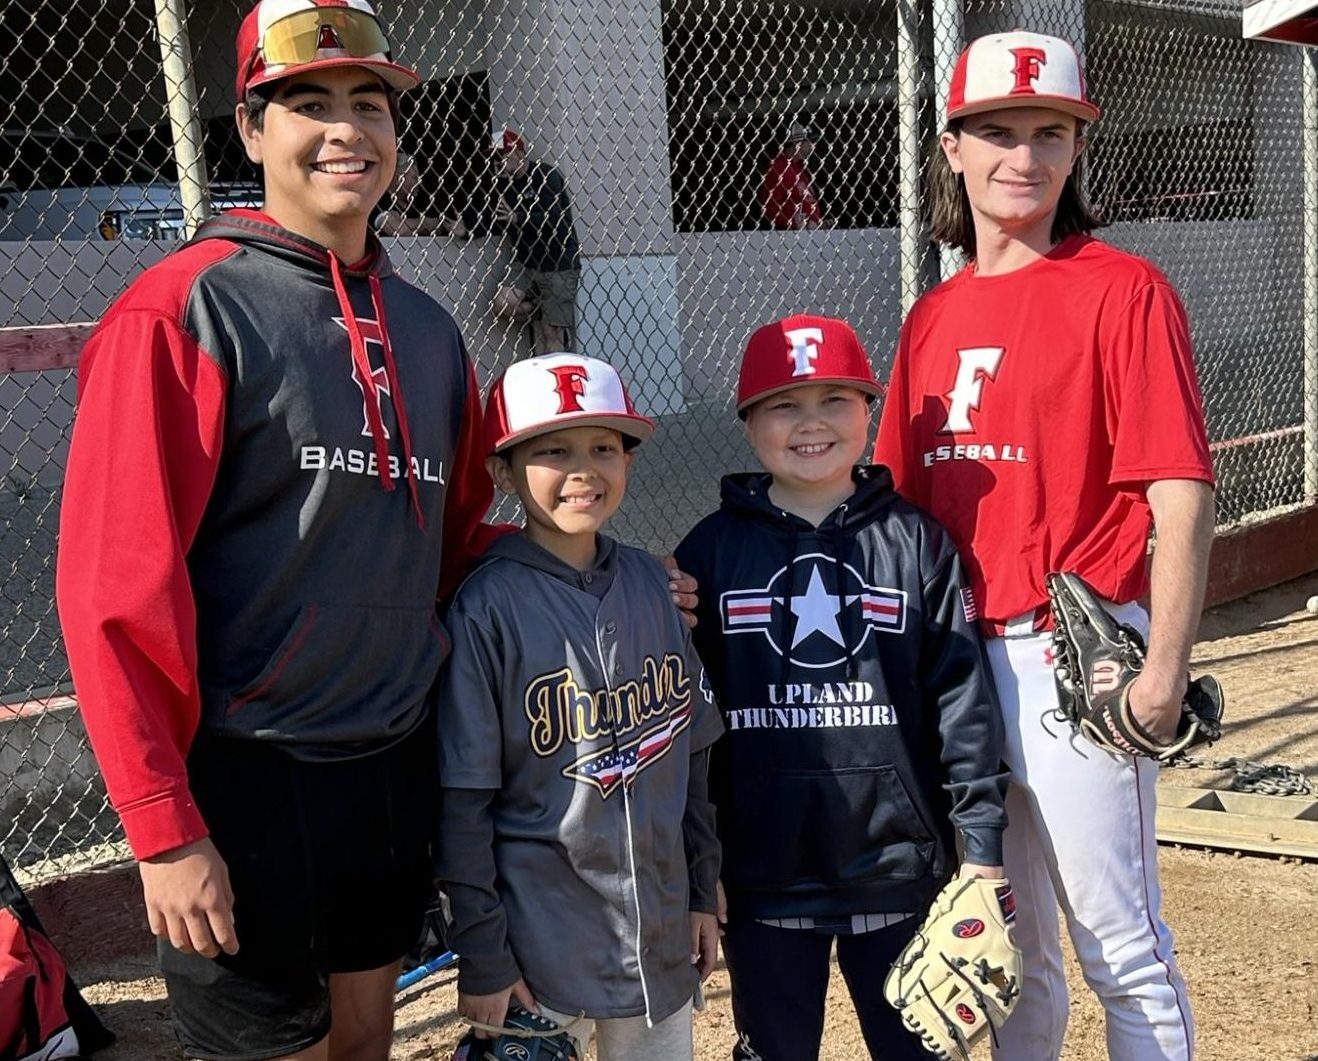 (Left to right) Luke Galvan, Easton Arceo, Mikah Carney, and David Padgett pose together for a photo. Arceo and Carney were aware of Galvan and Padgett’s journey of having childhood cancer, showing living proof that cancer can and will be overcome.